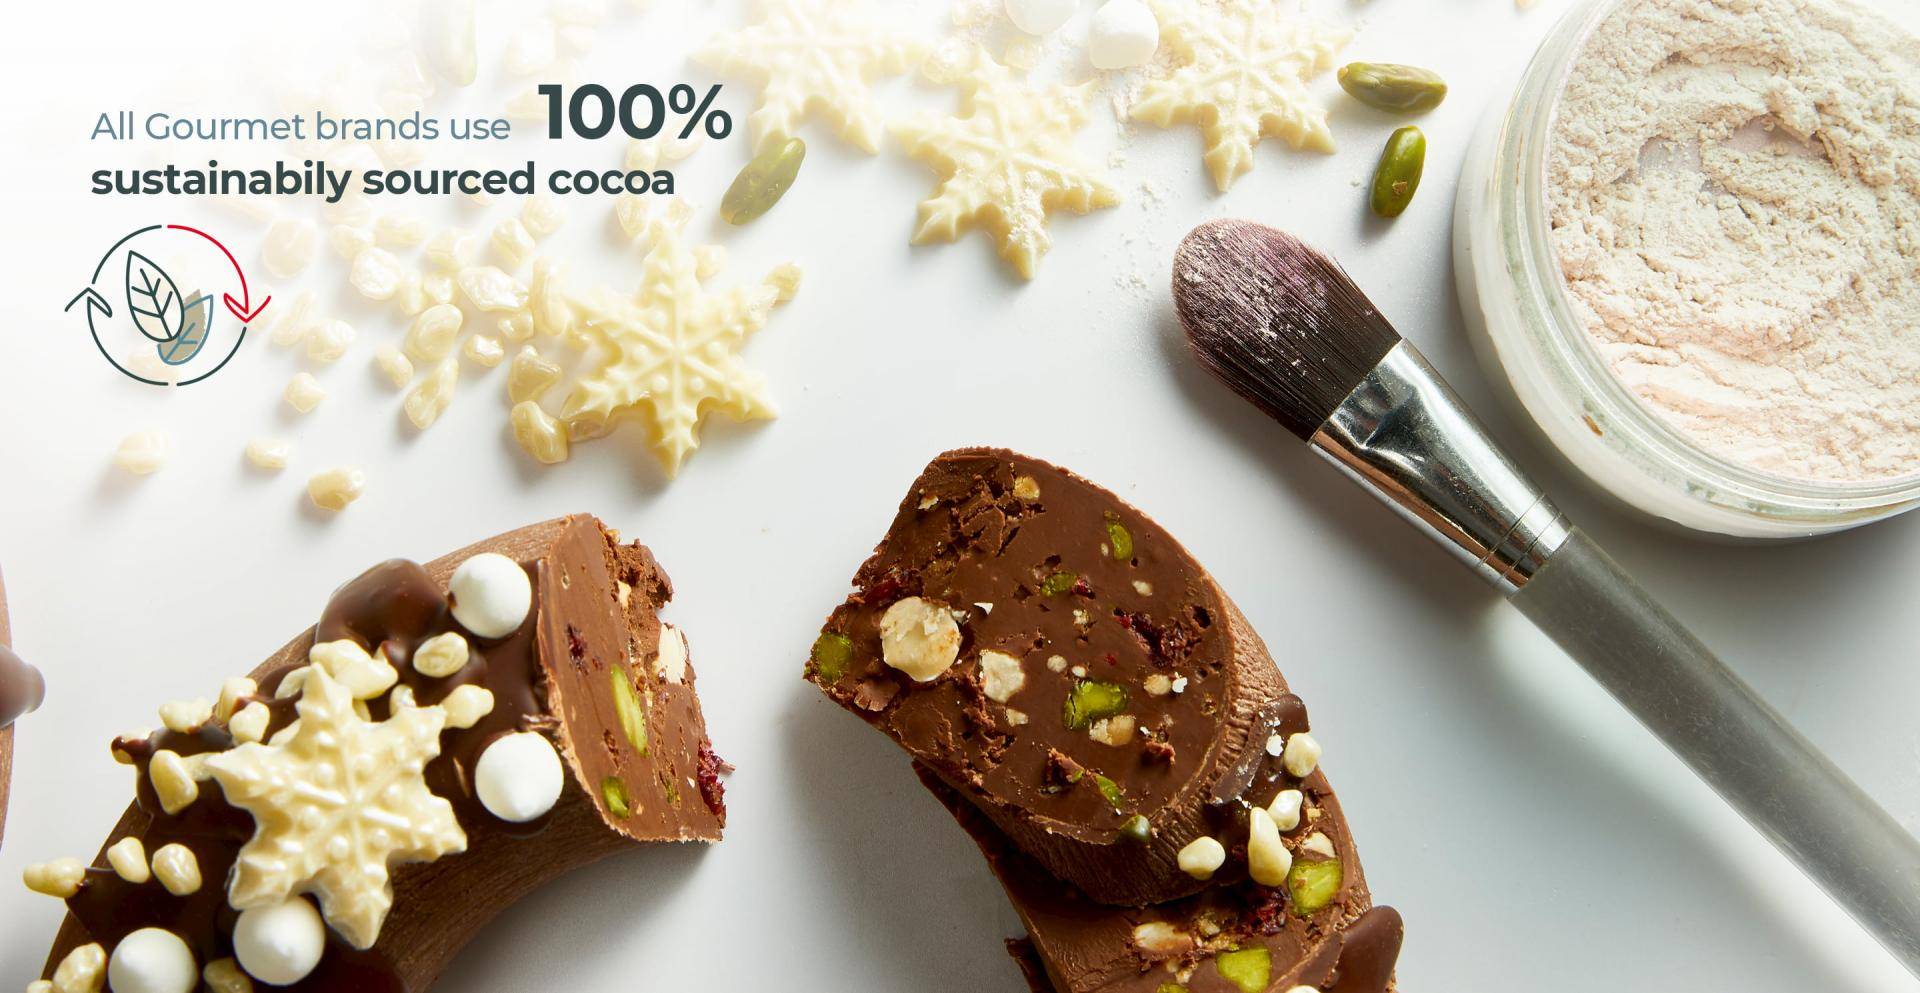 Sustainable Cocoa Fiscal Year 2019/20 Barry Callebaut